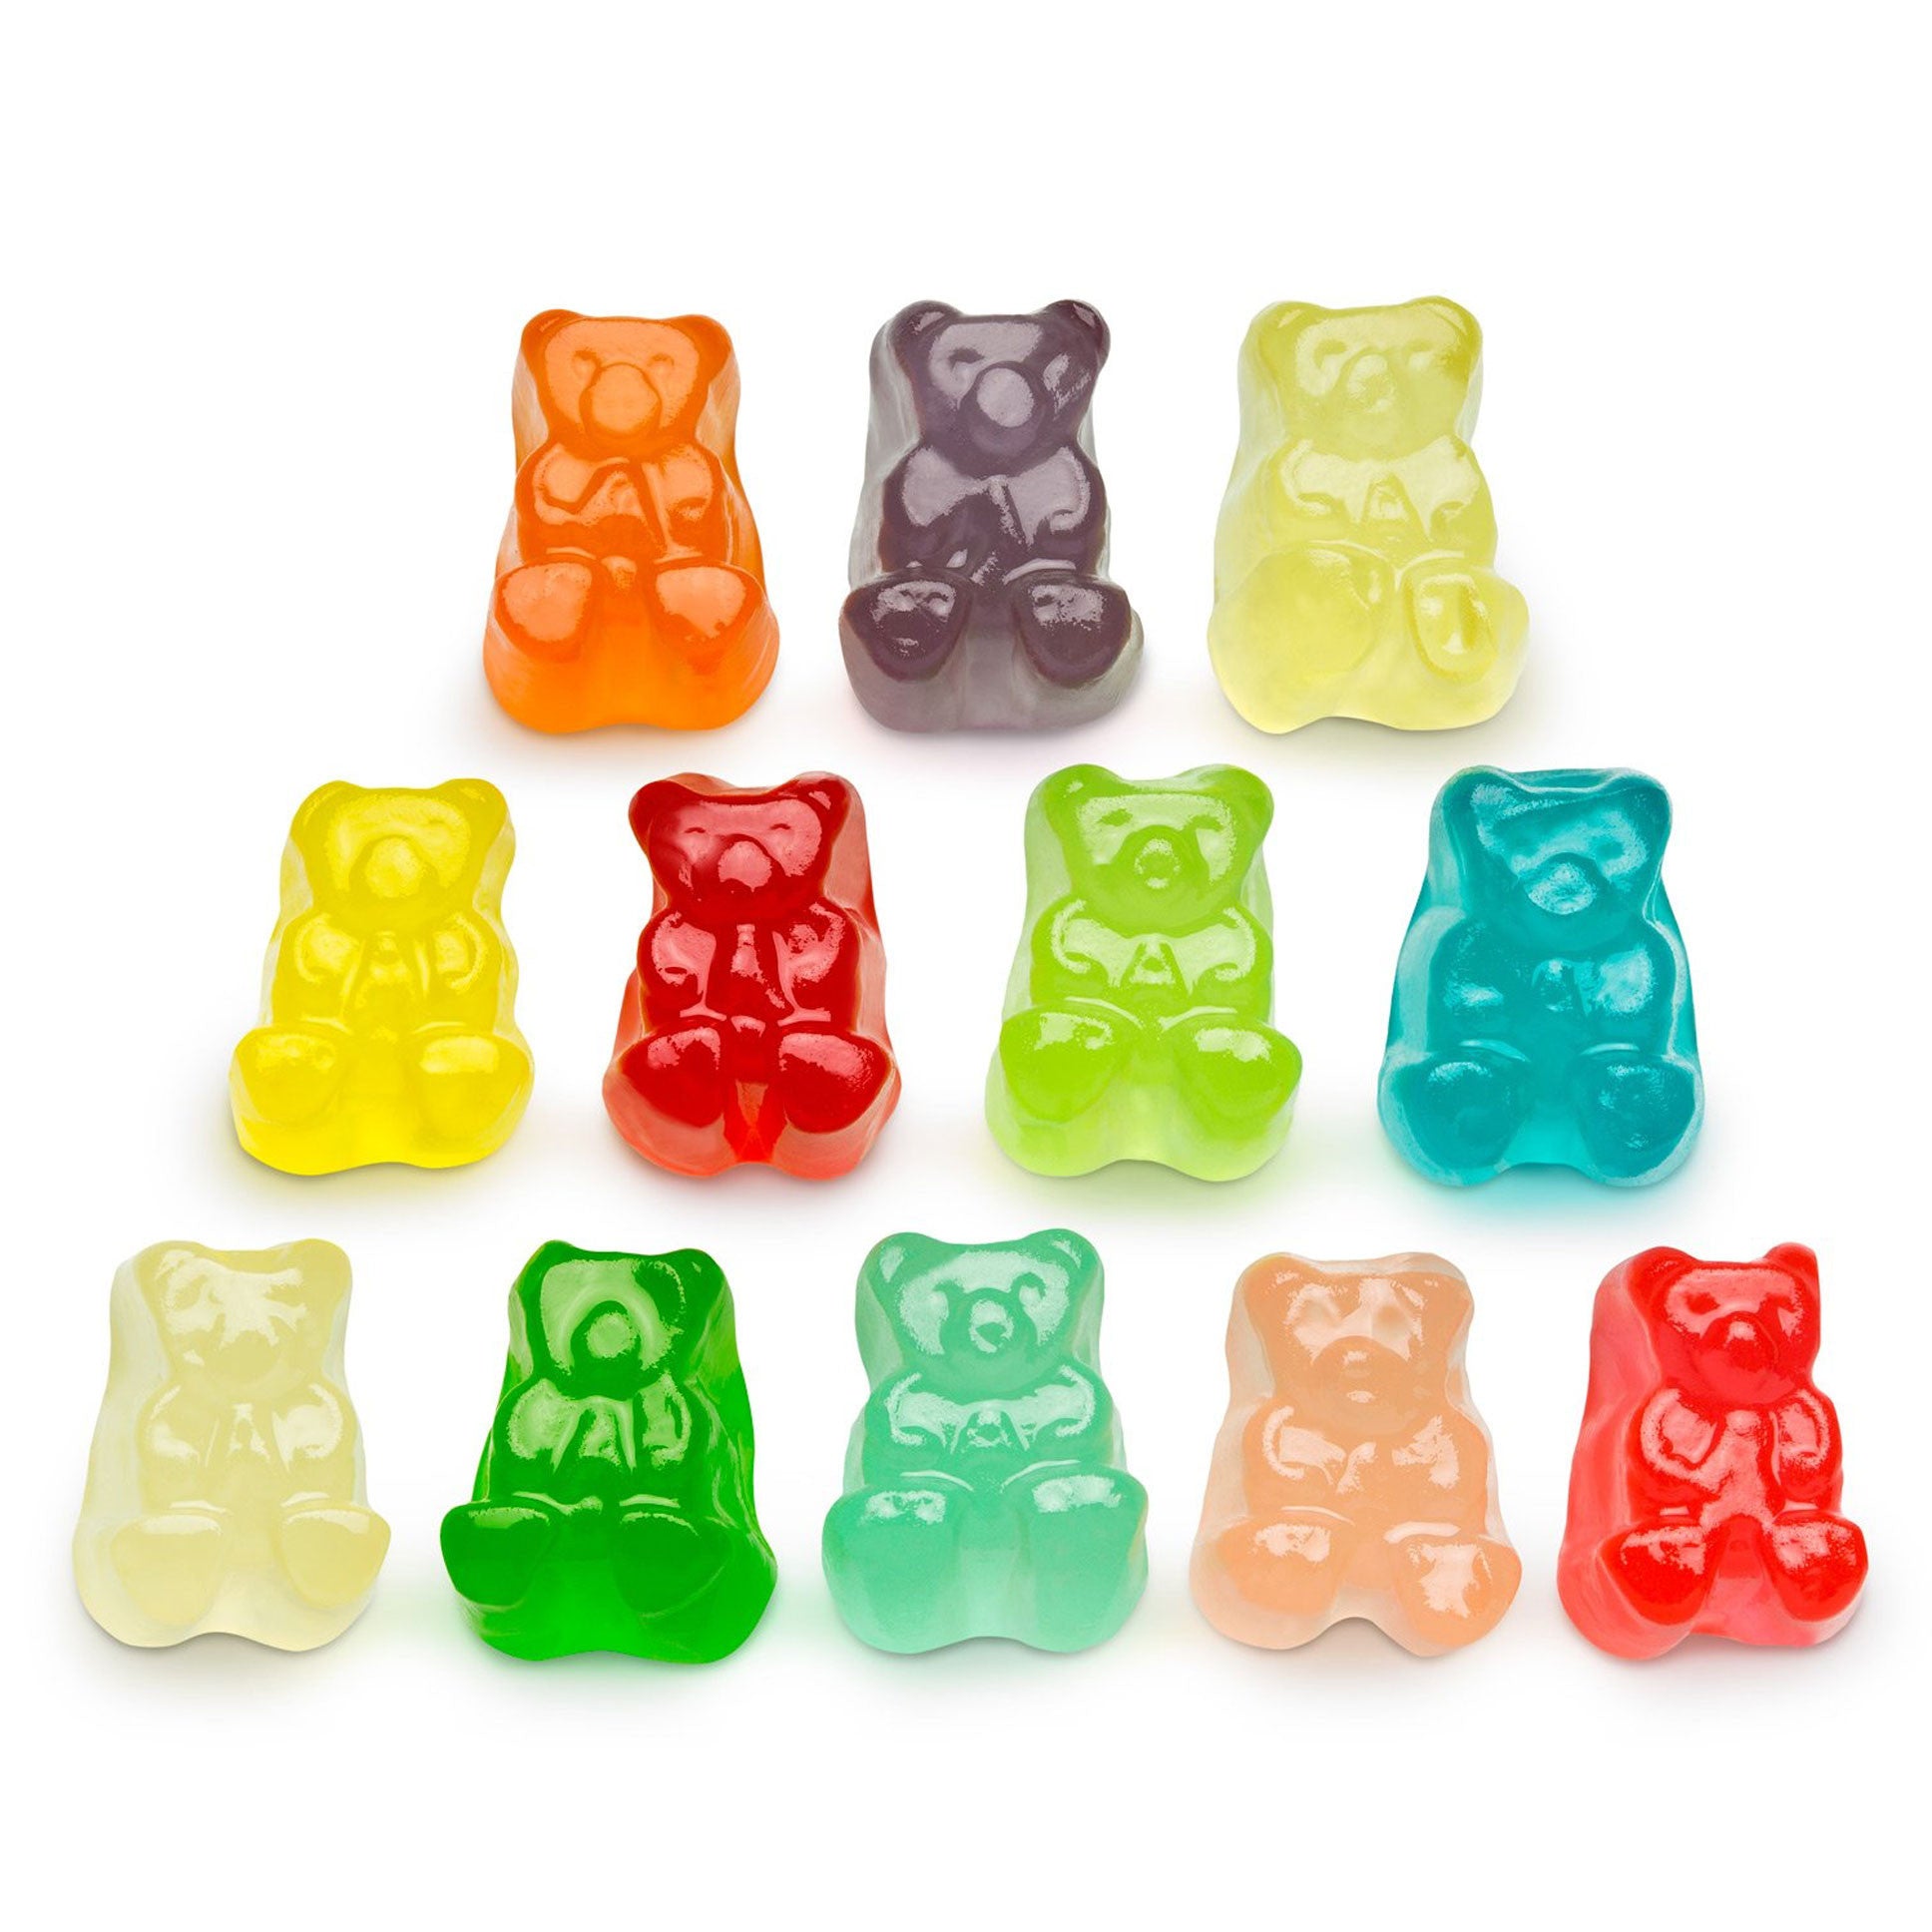 Albanese 12 Flavor Gummi Bear Cubs Snyder's Candy